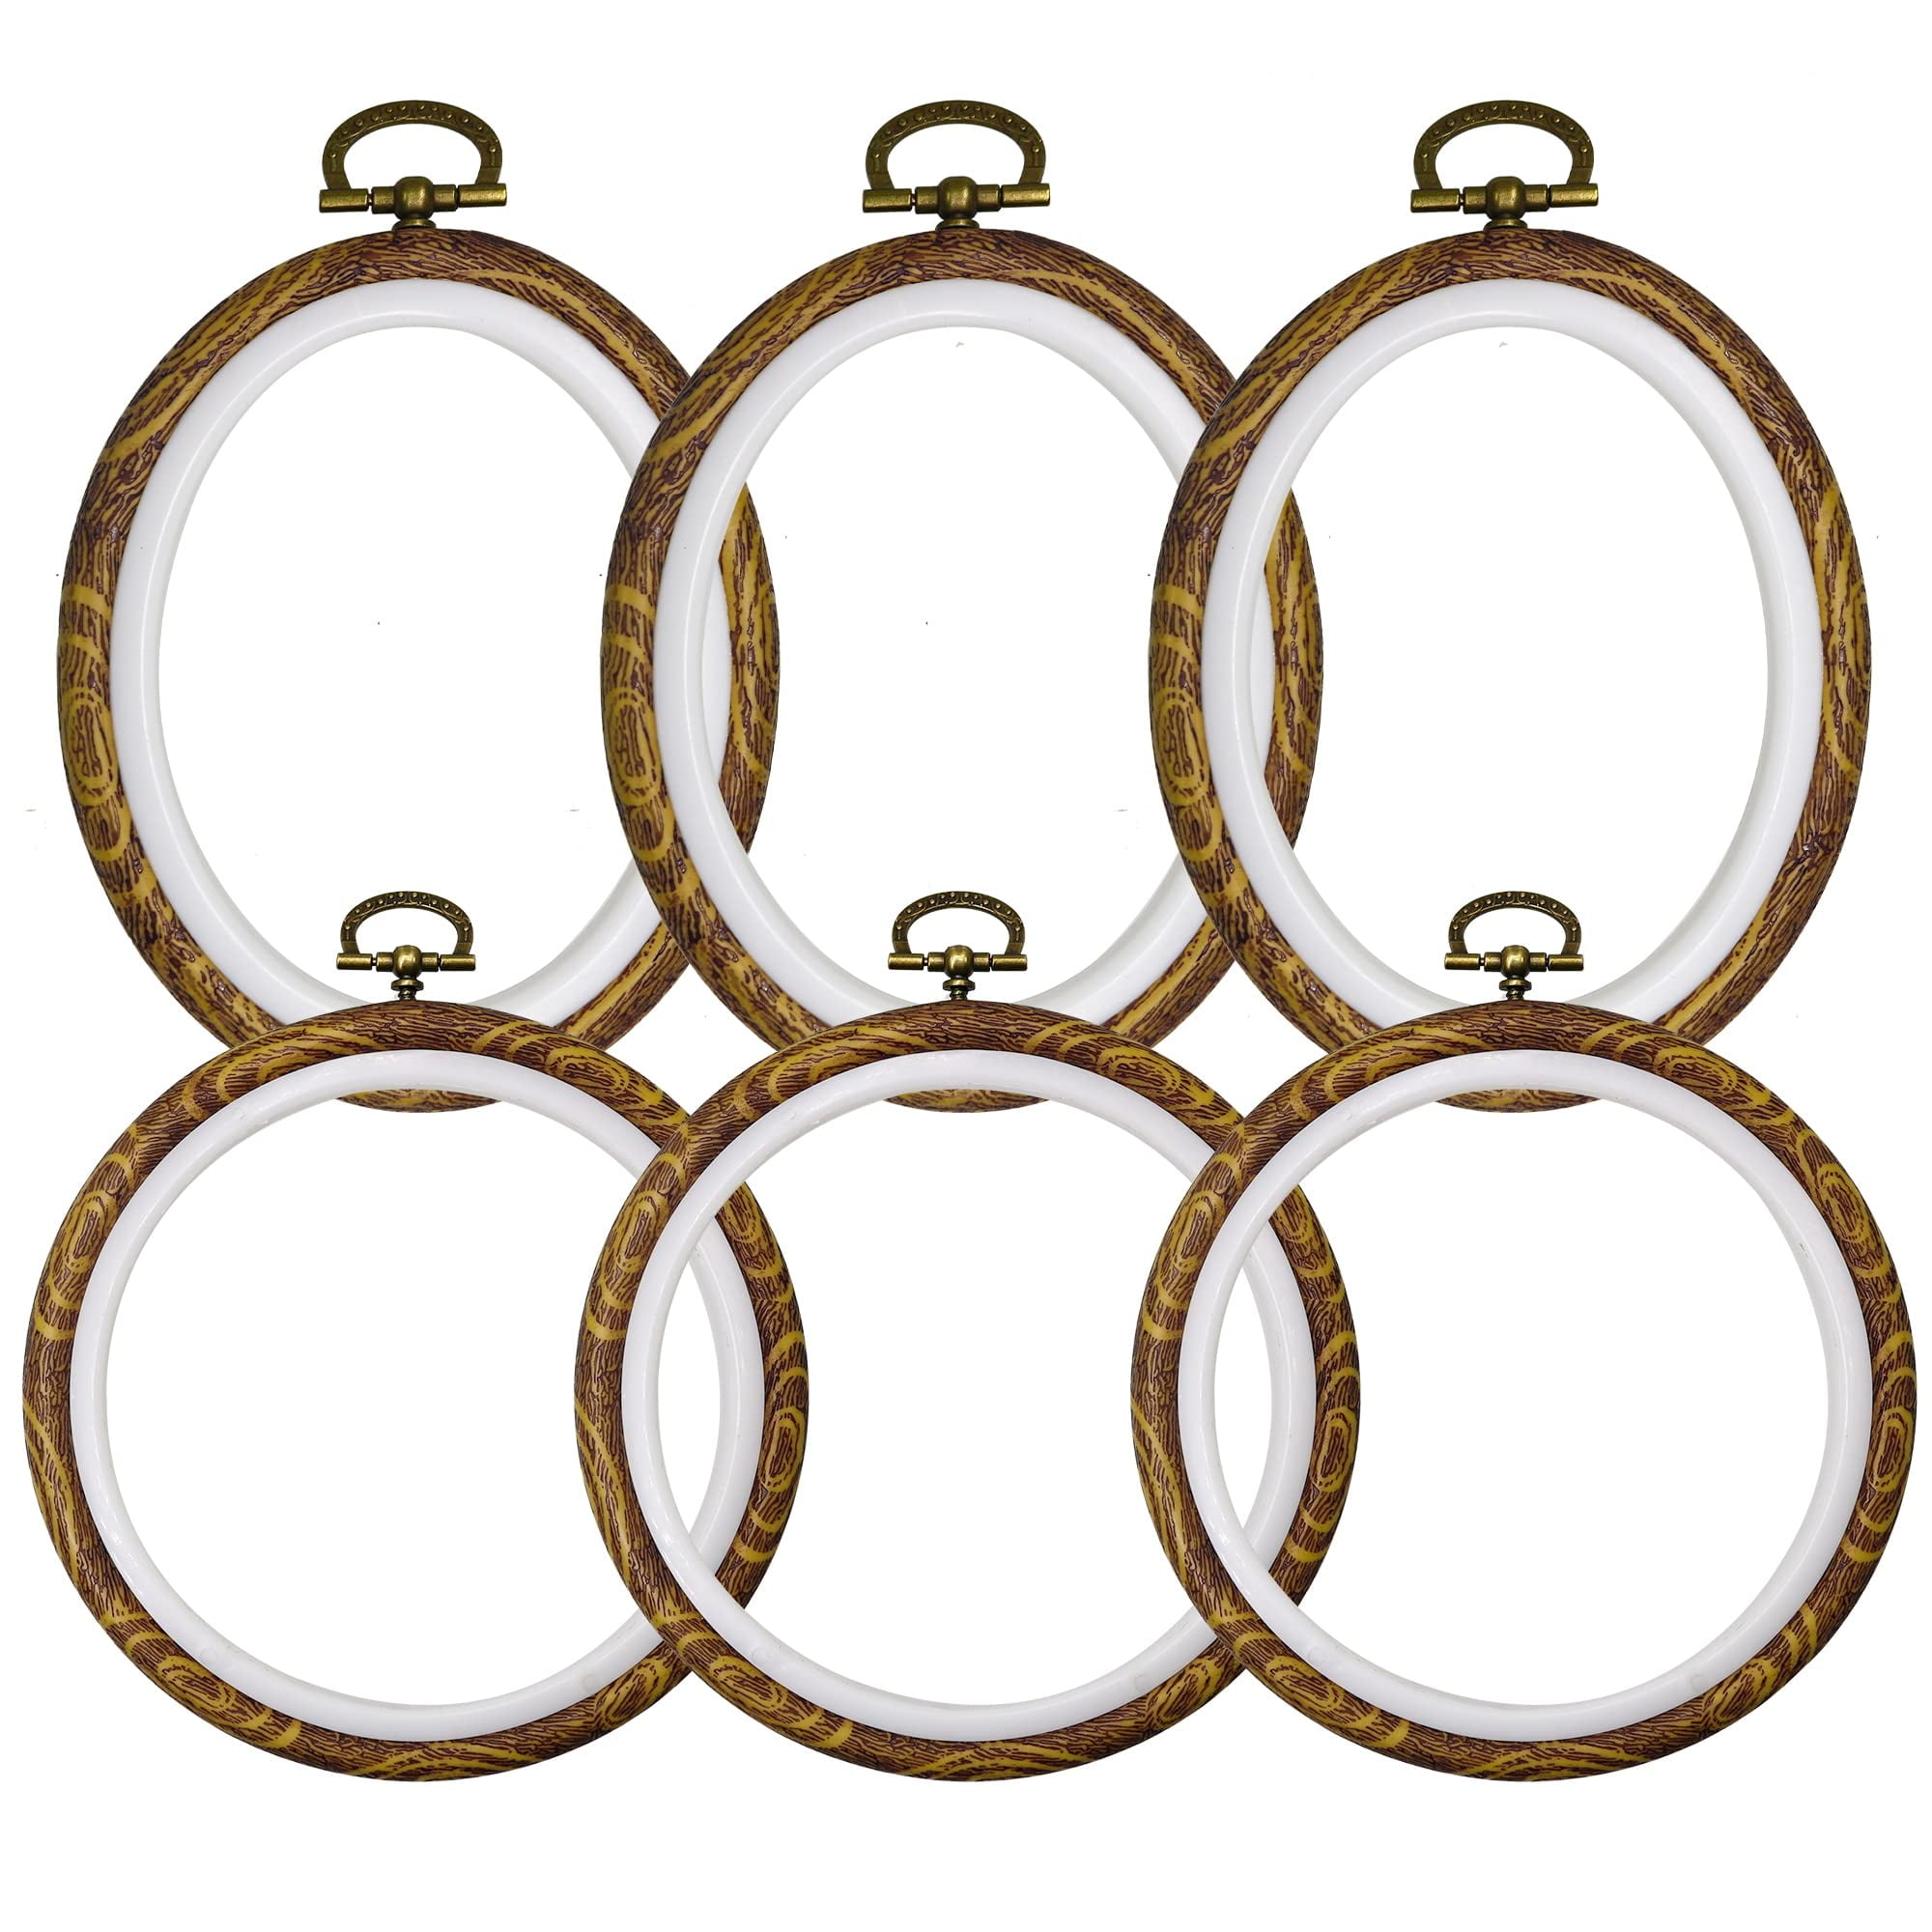 VILLCASE 2pcs Round Photo Frame Cross Stitch Hoop Wooden Circle Cross  Stitch Frames for Display Wall Hanging Photo Frames Wooden Embroidery Hoop  Frame